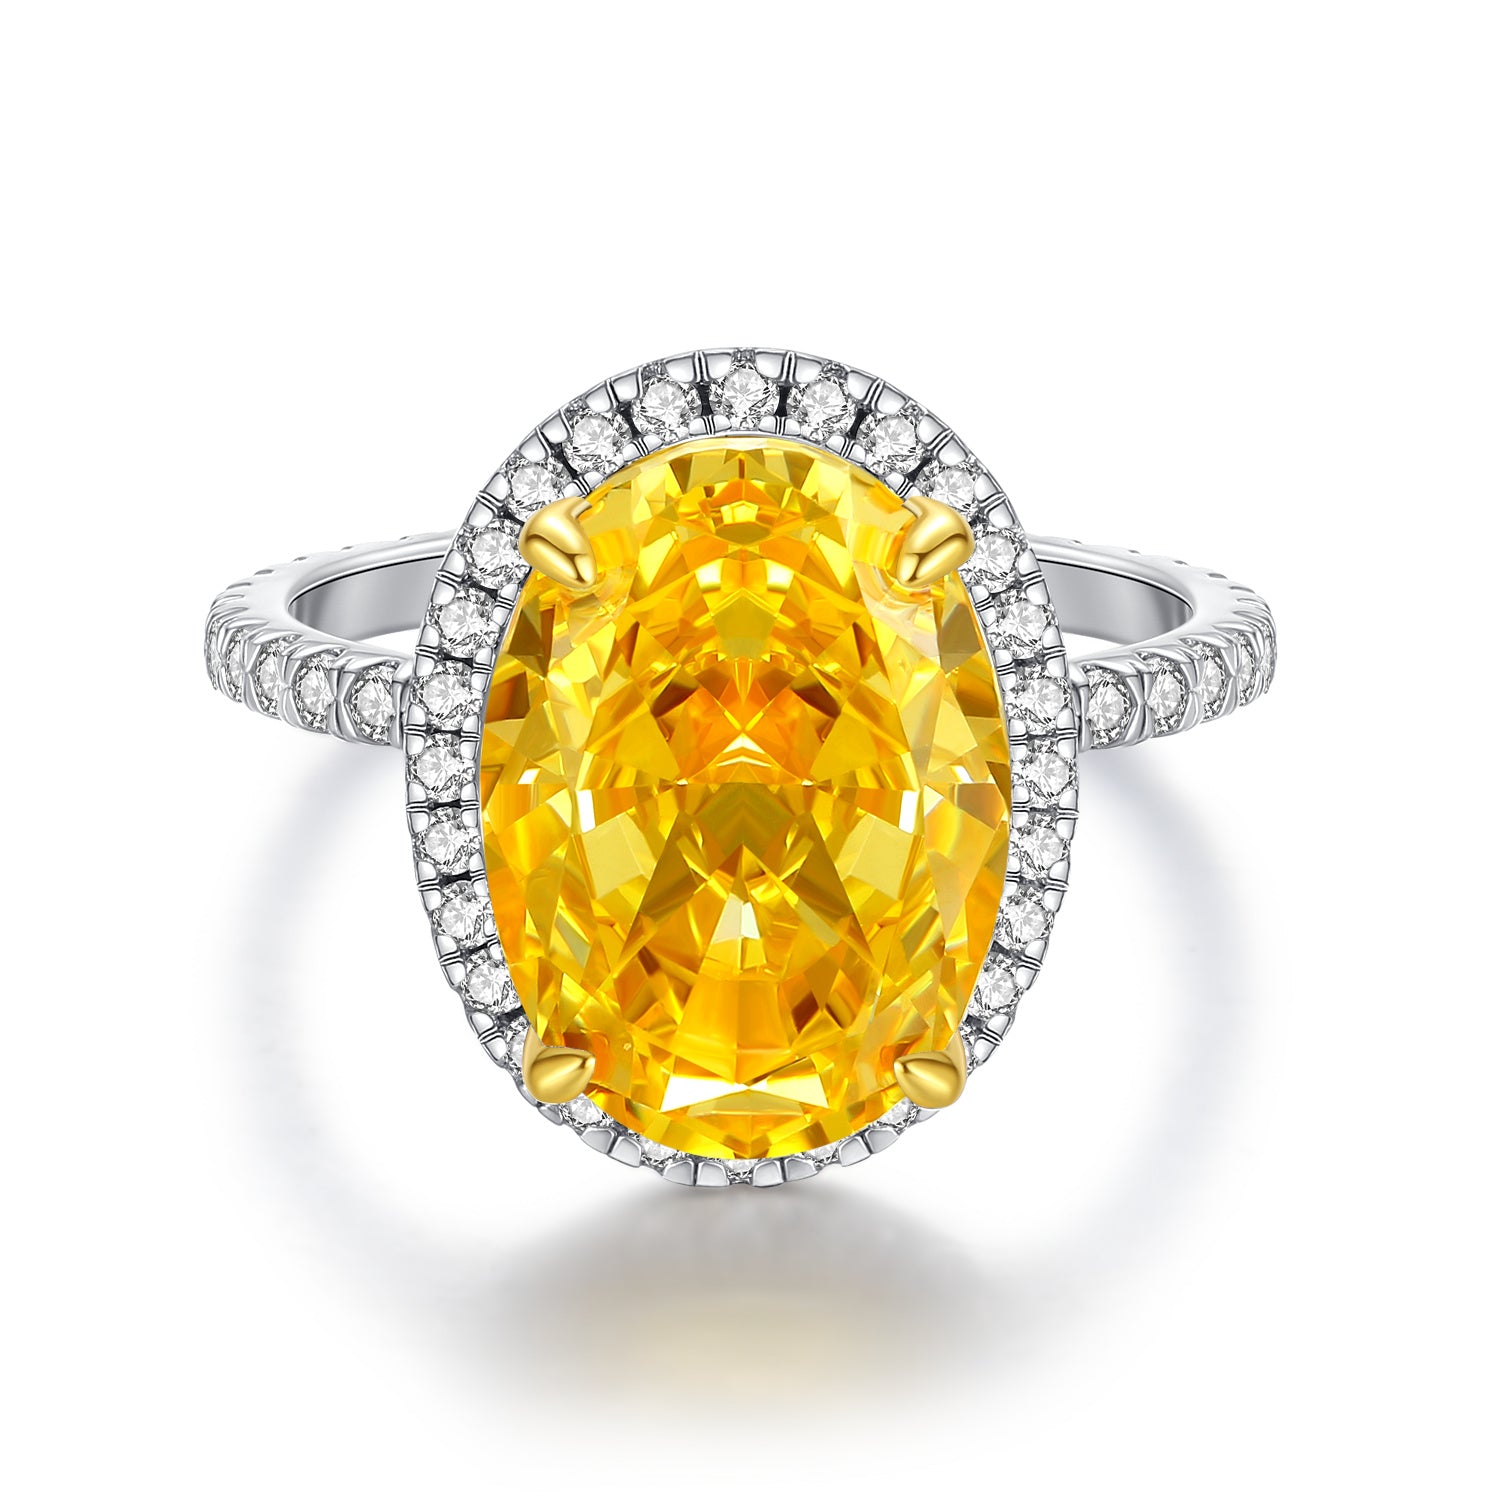 FairyLocus 10ct “Lifetime Love” Fancy Yellow Halo Oval Solitaire Sterling Silver Ring FLCYBSRG08 FairyLocus